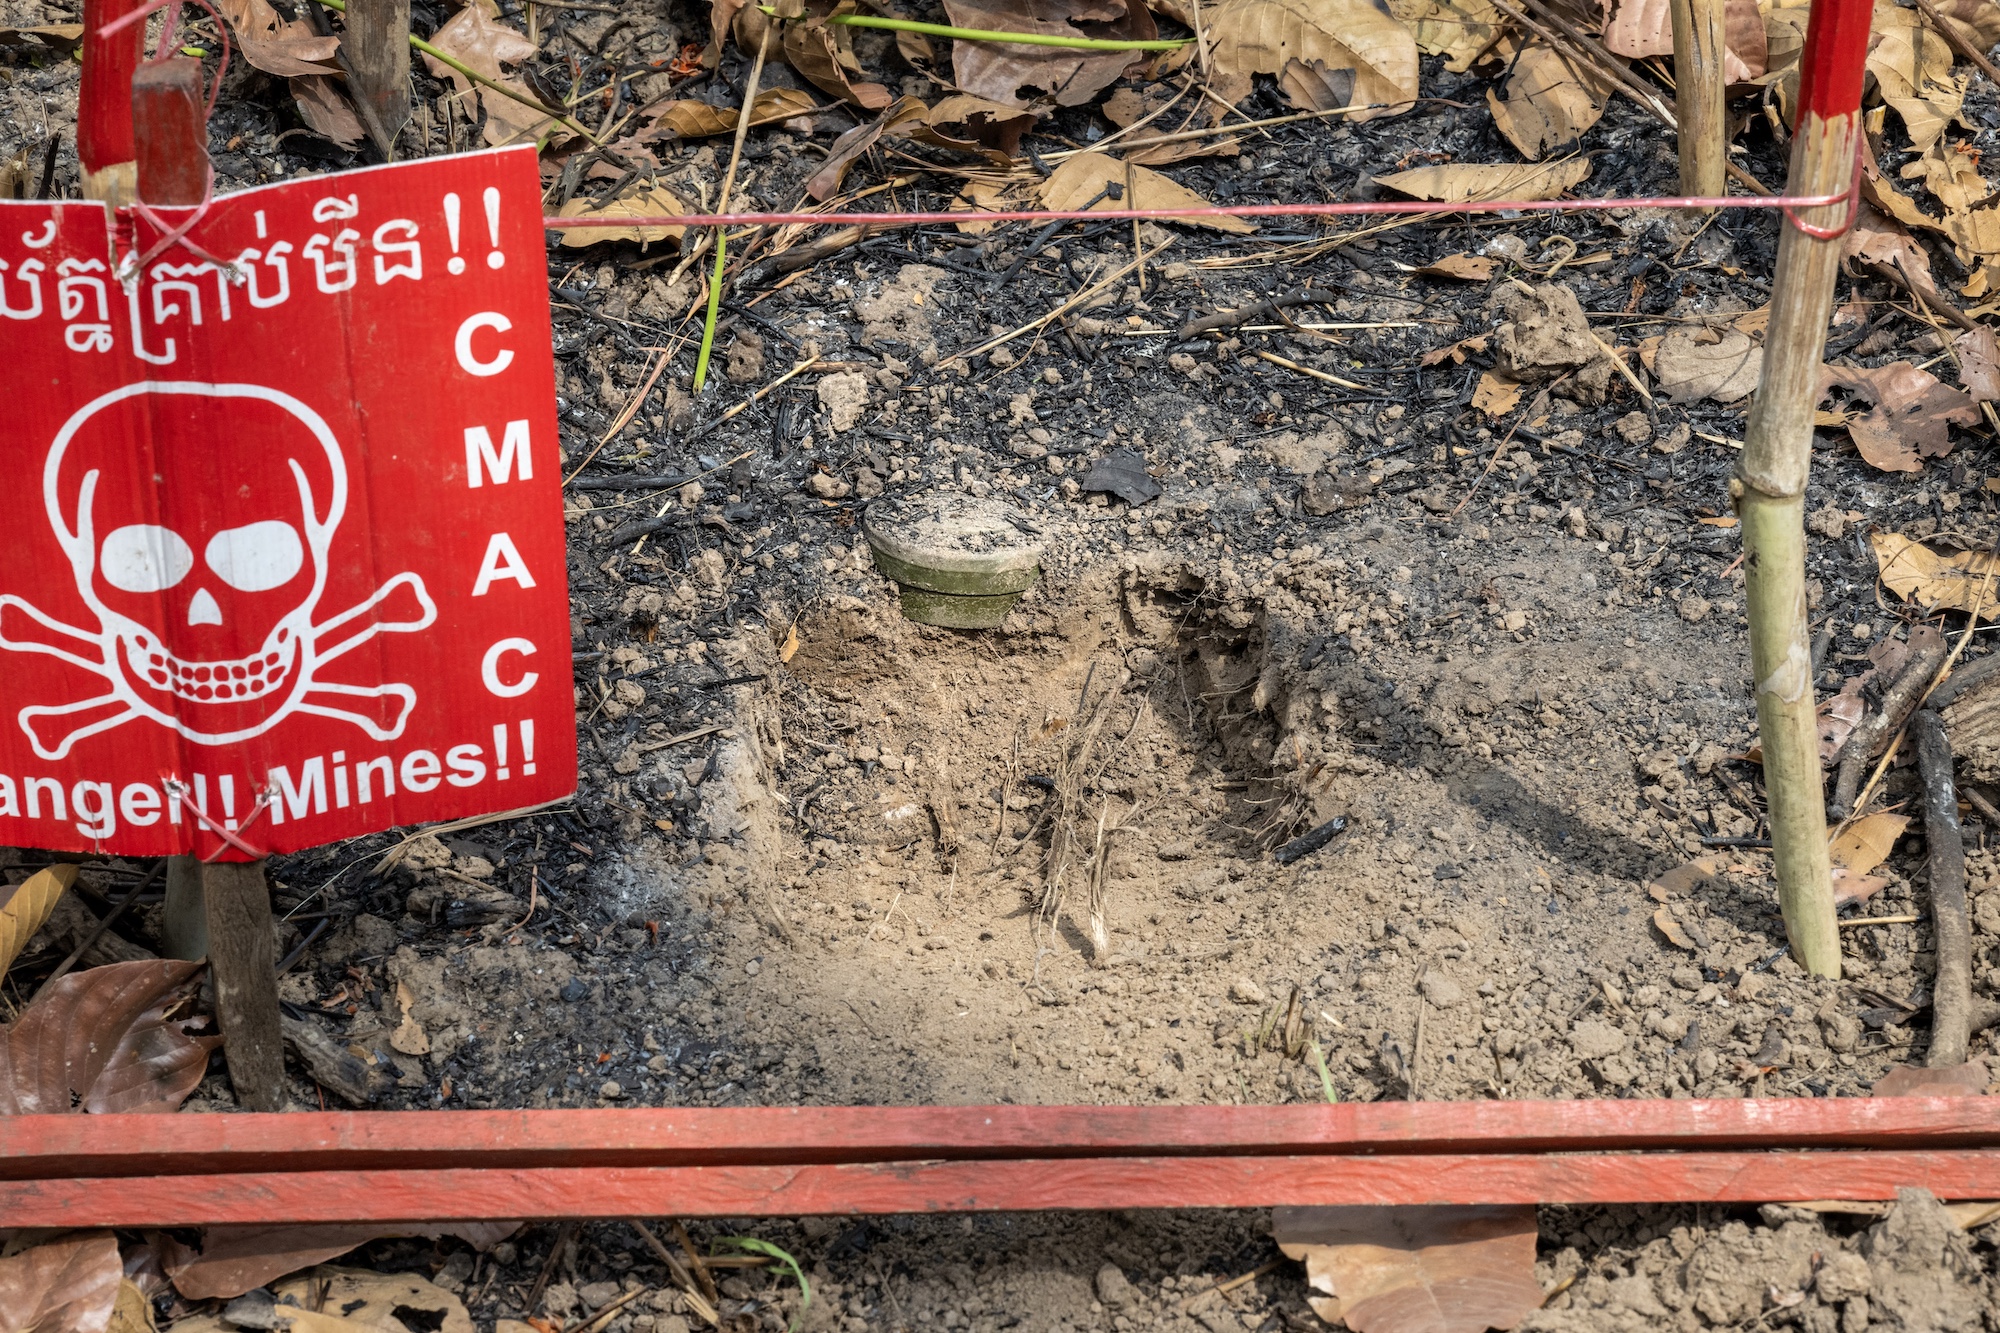 8 Not-So-Fun Facts about Landmines (and 3 More Hopeful Ones)